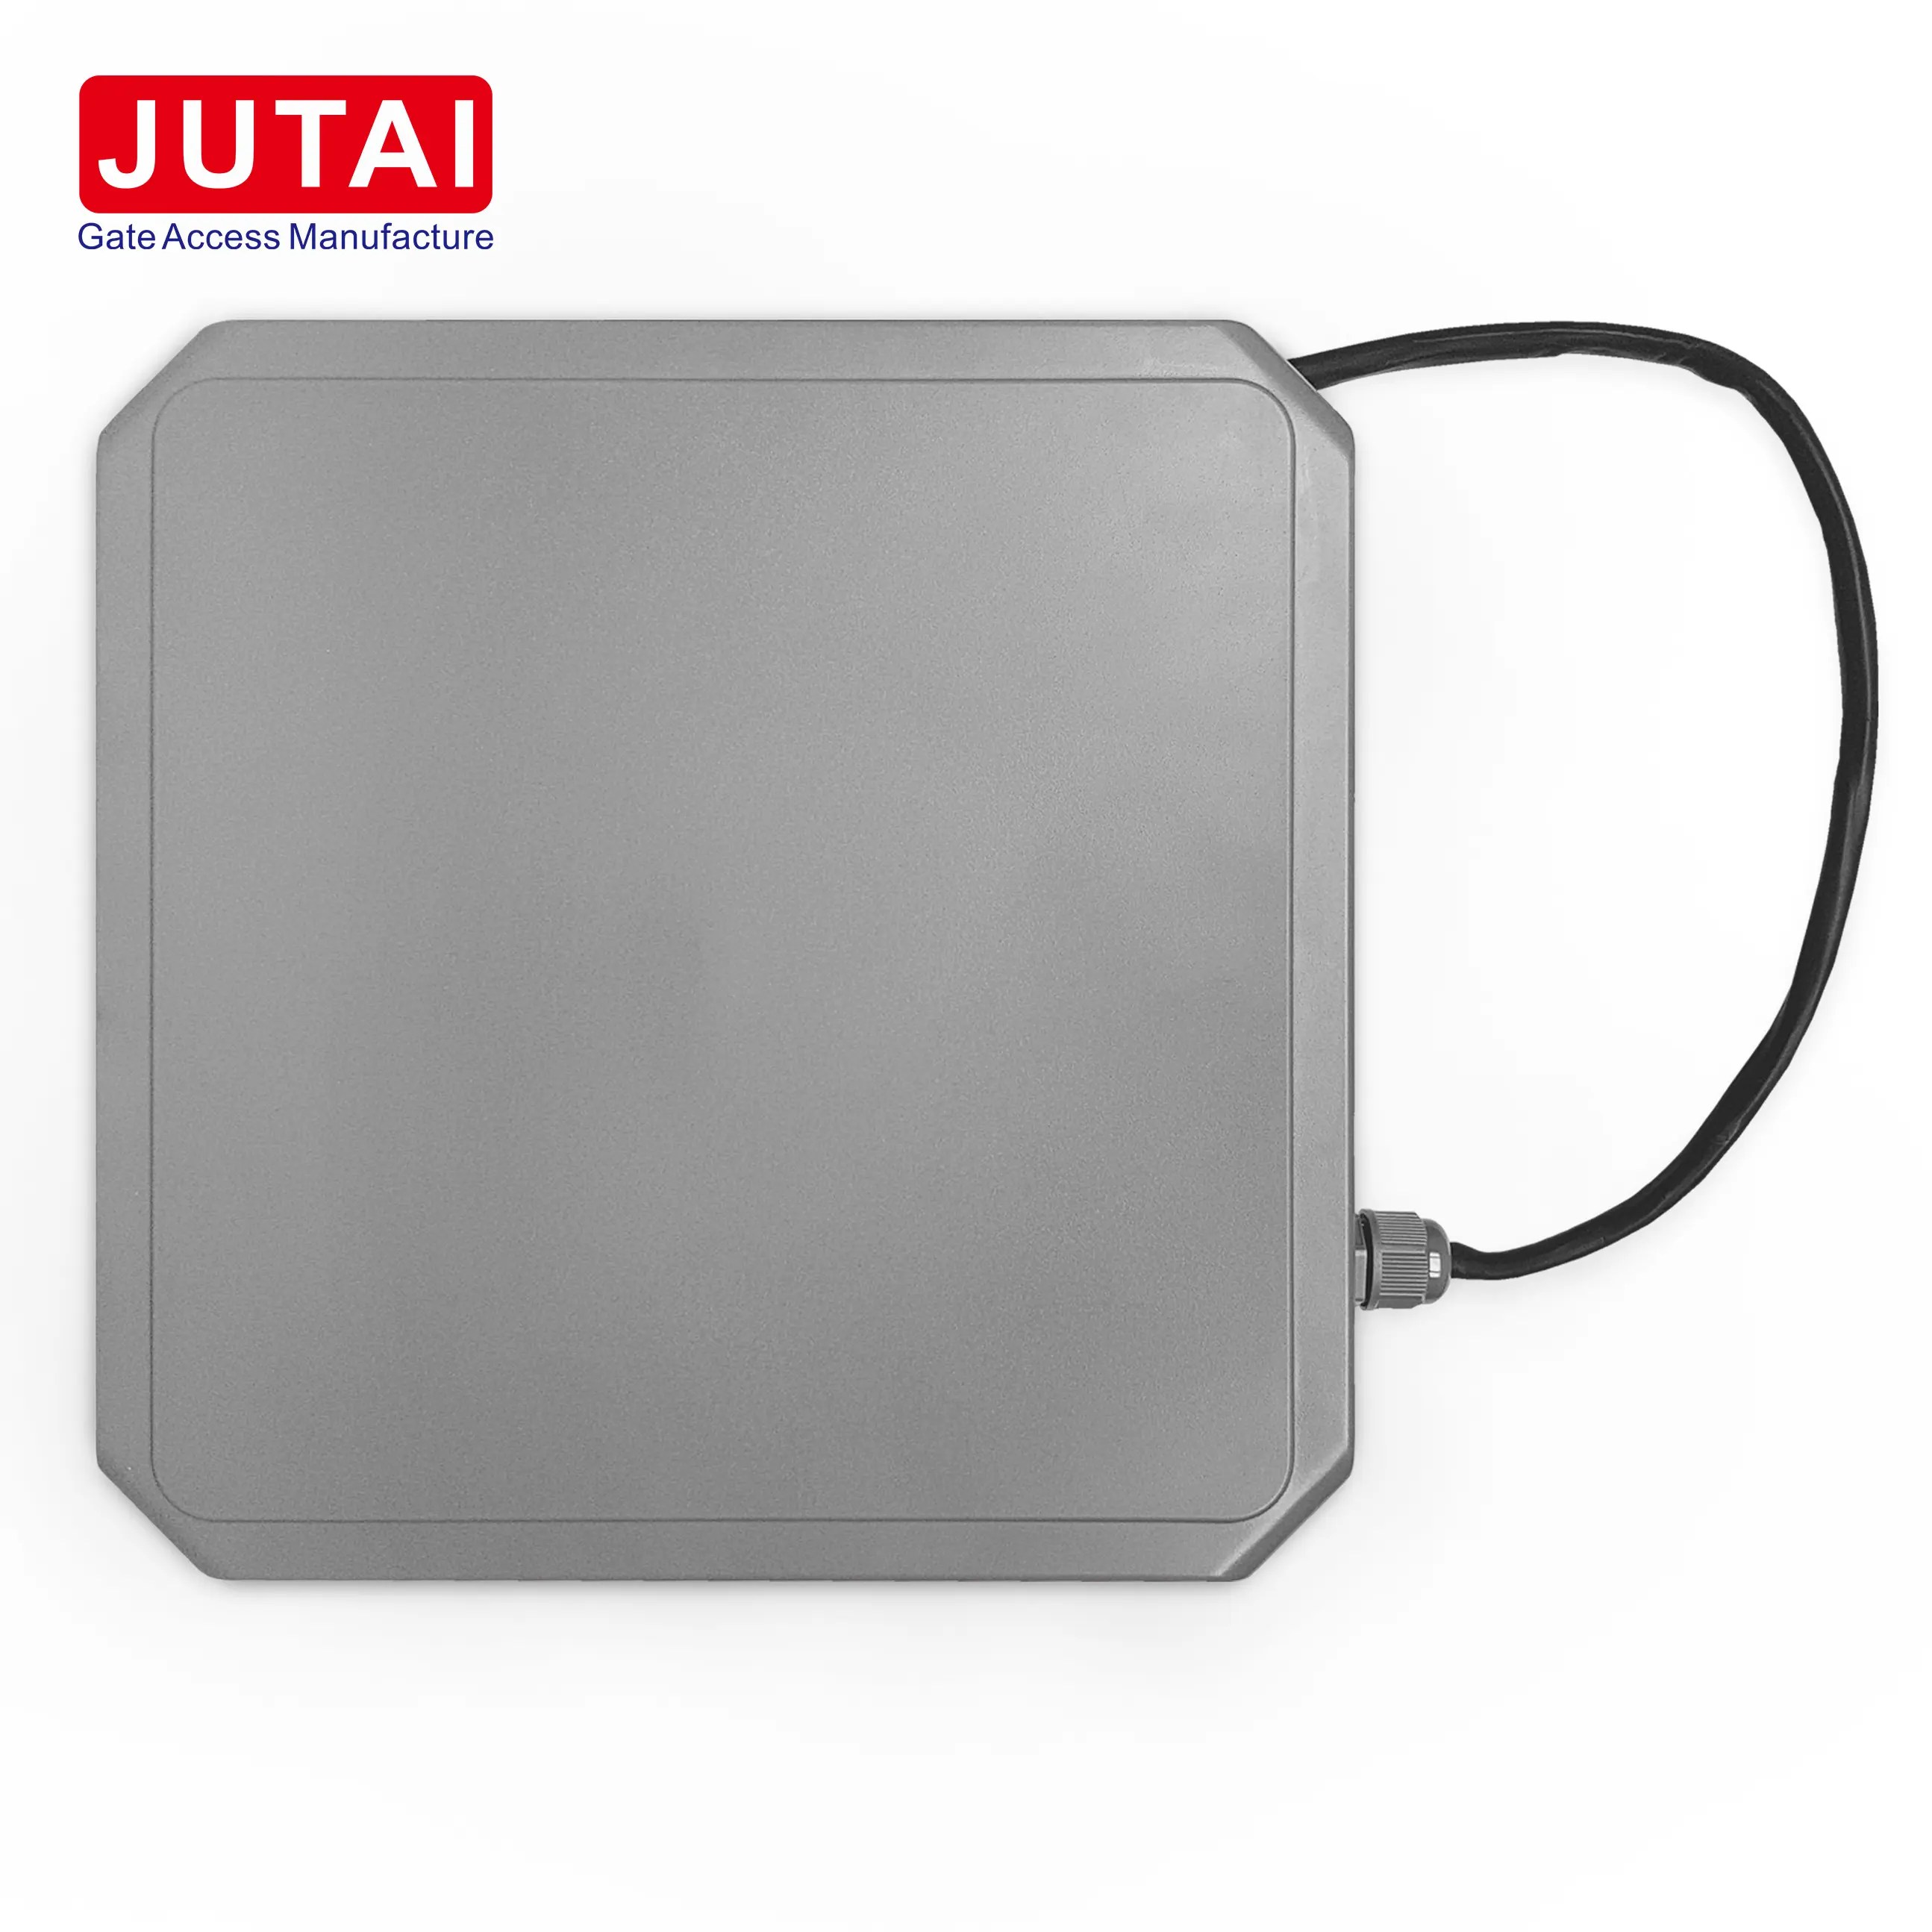 High quality JUTAI encryption uhf long range reader, more convenient to work with a serial of UHF stickers/tag